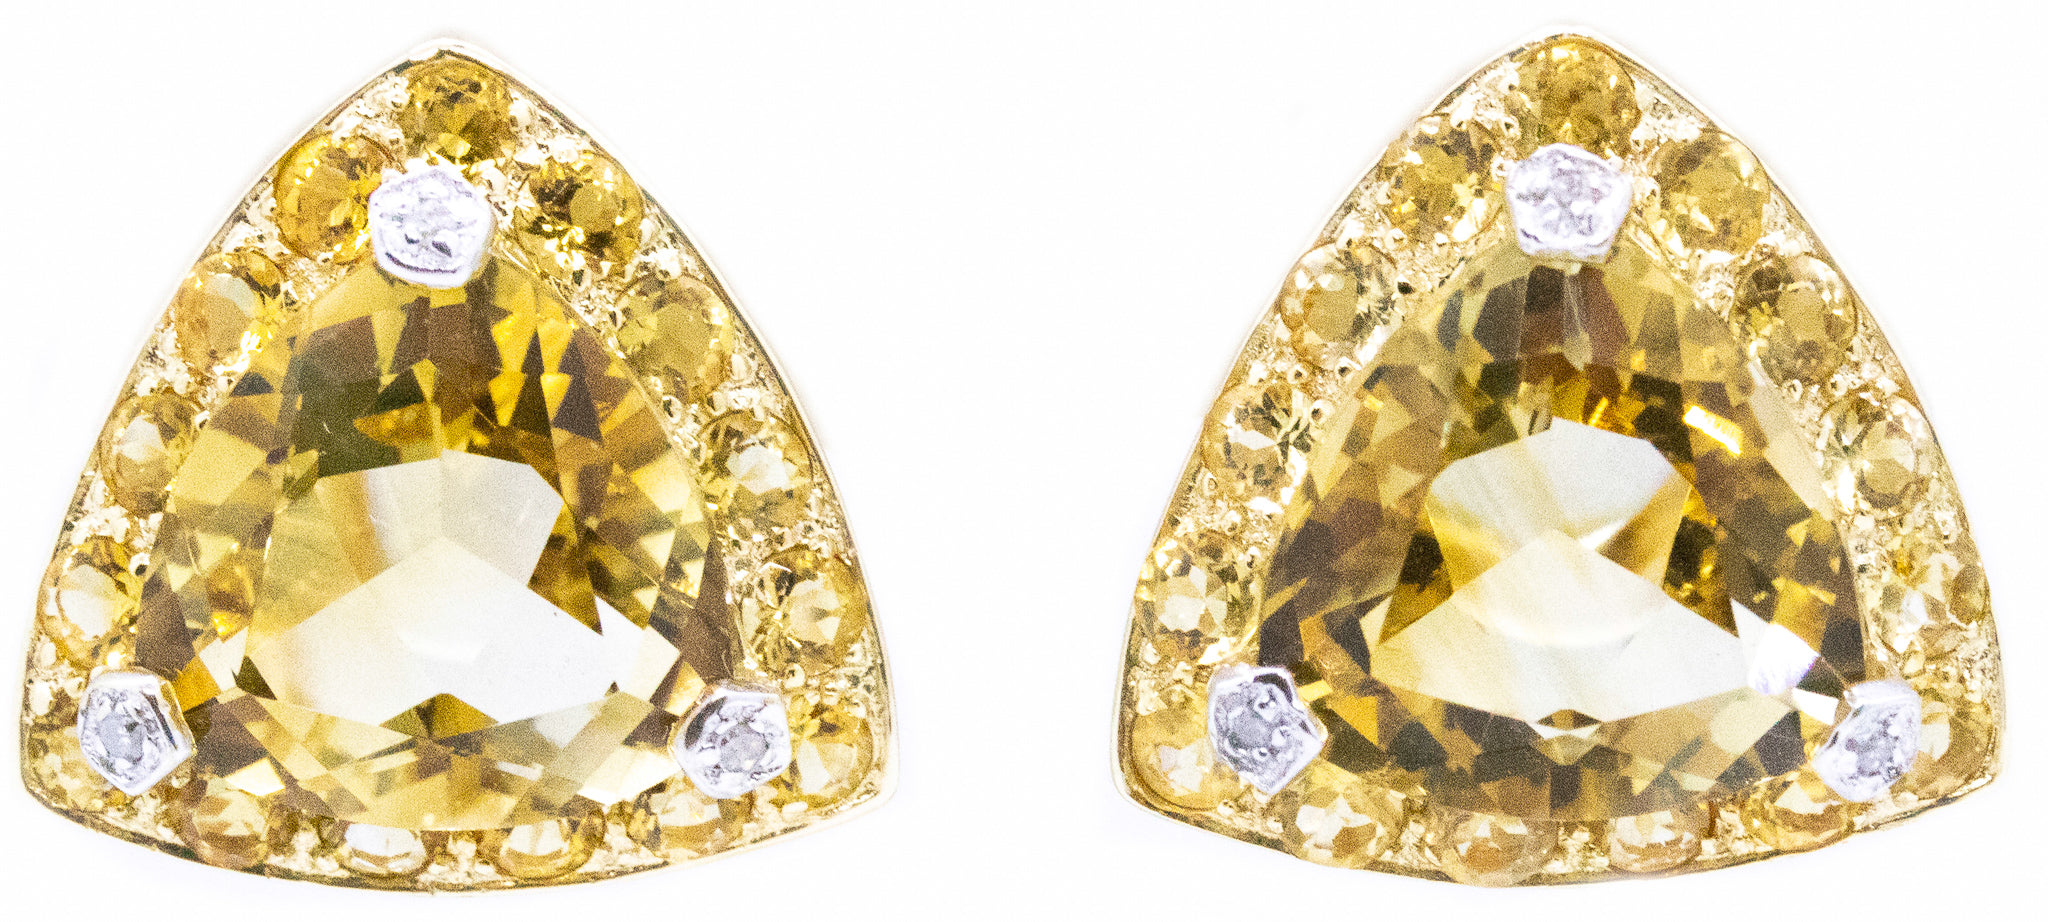 EARRINGS CLIPS IN 14 KT WITH 19.86 Cts YELLOW CITRINE & DIAMONDS